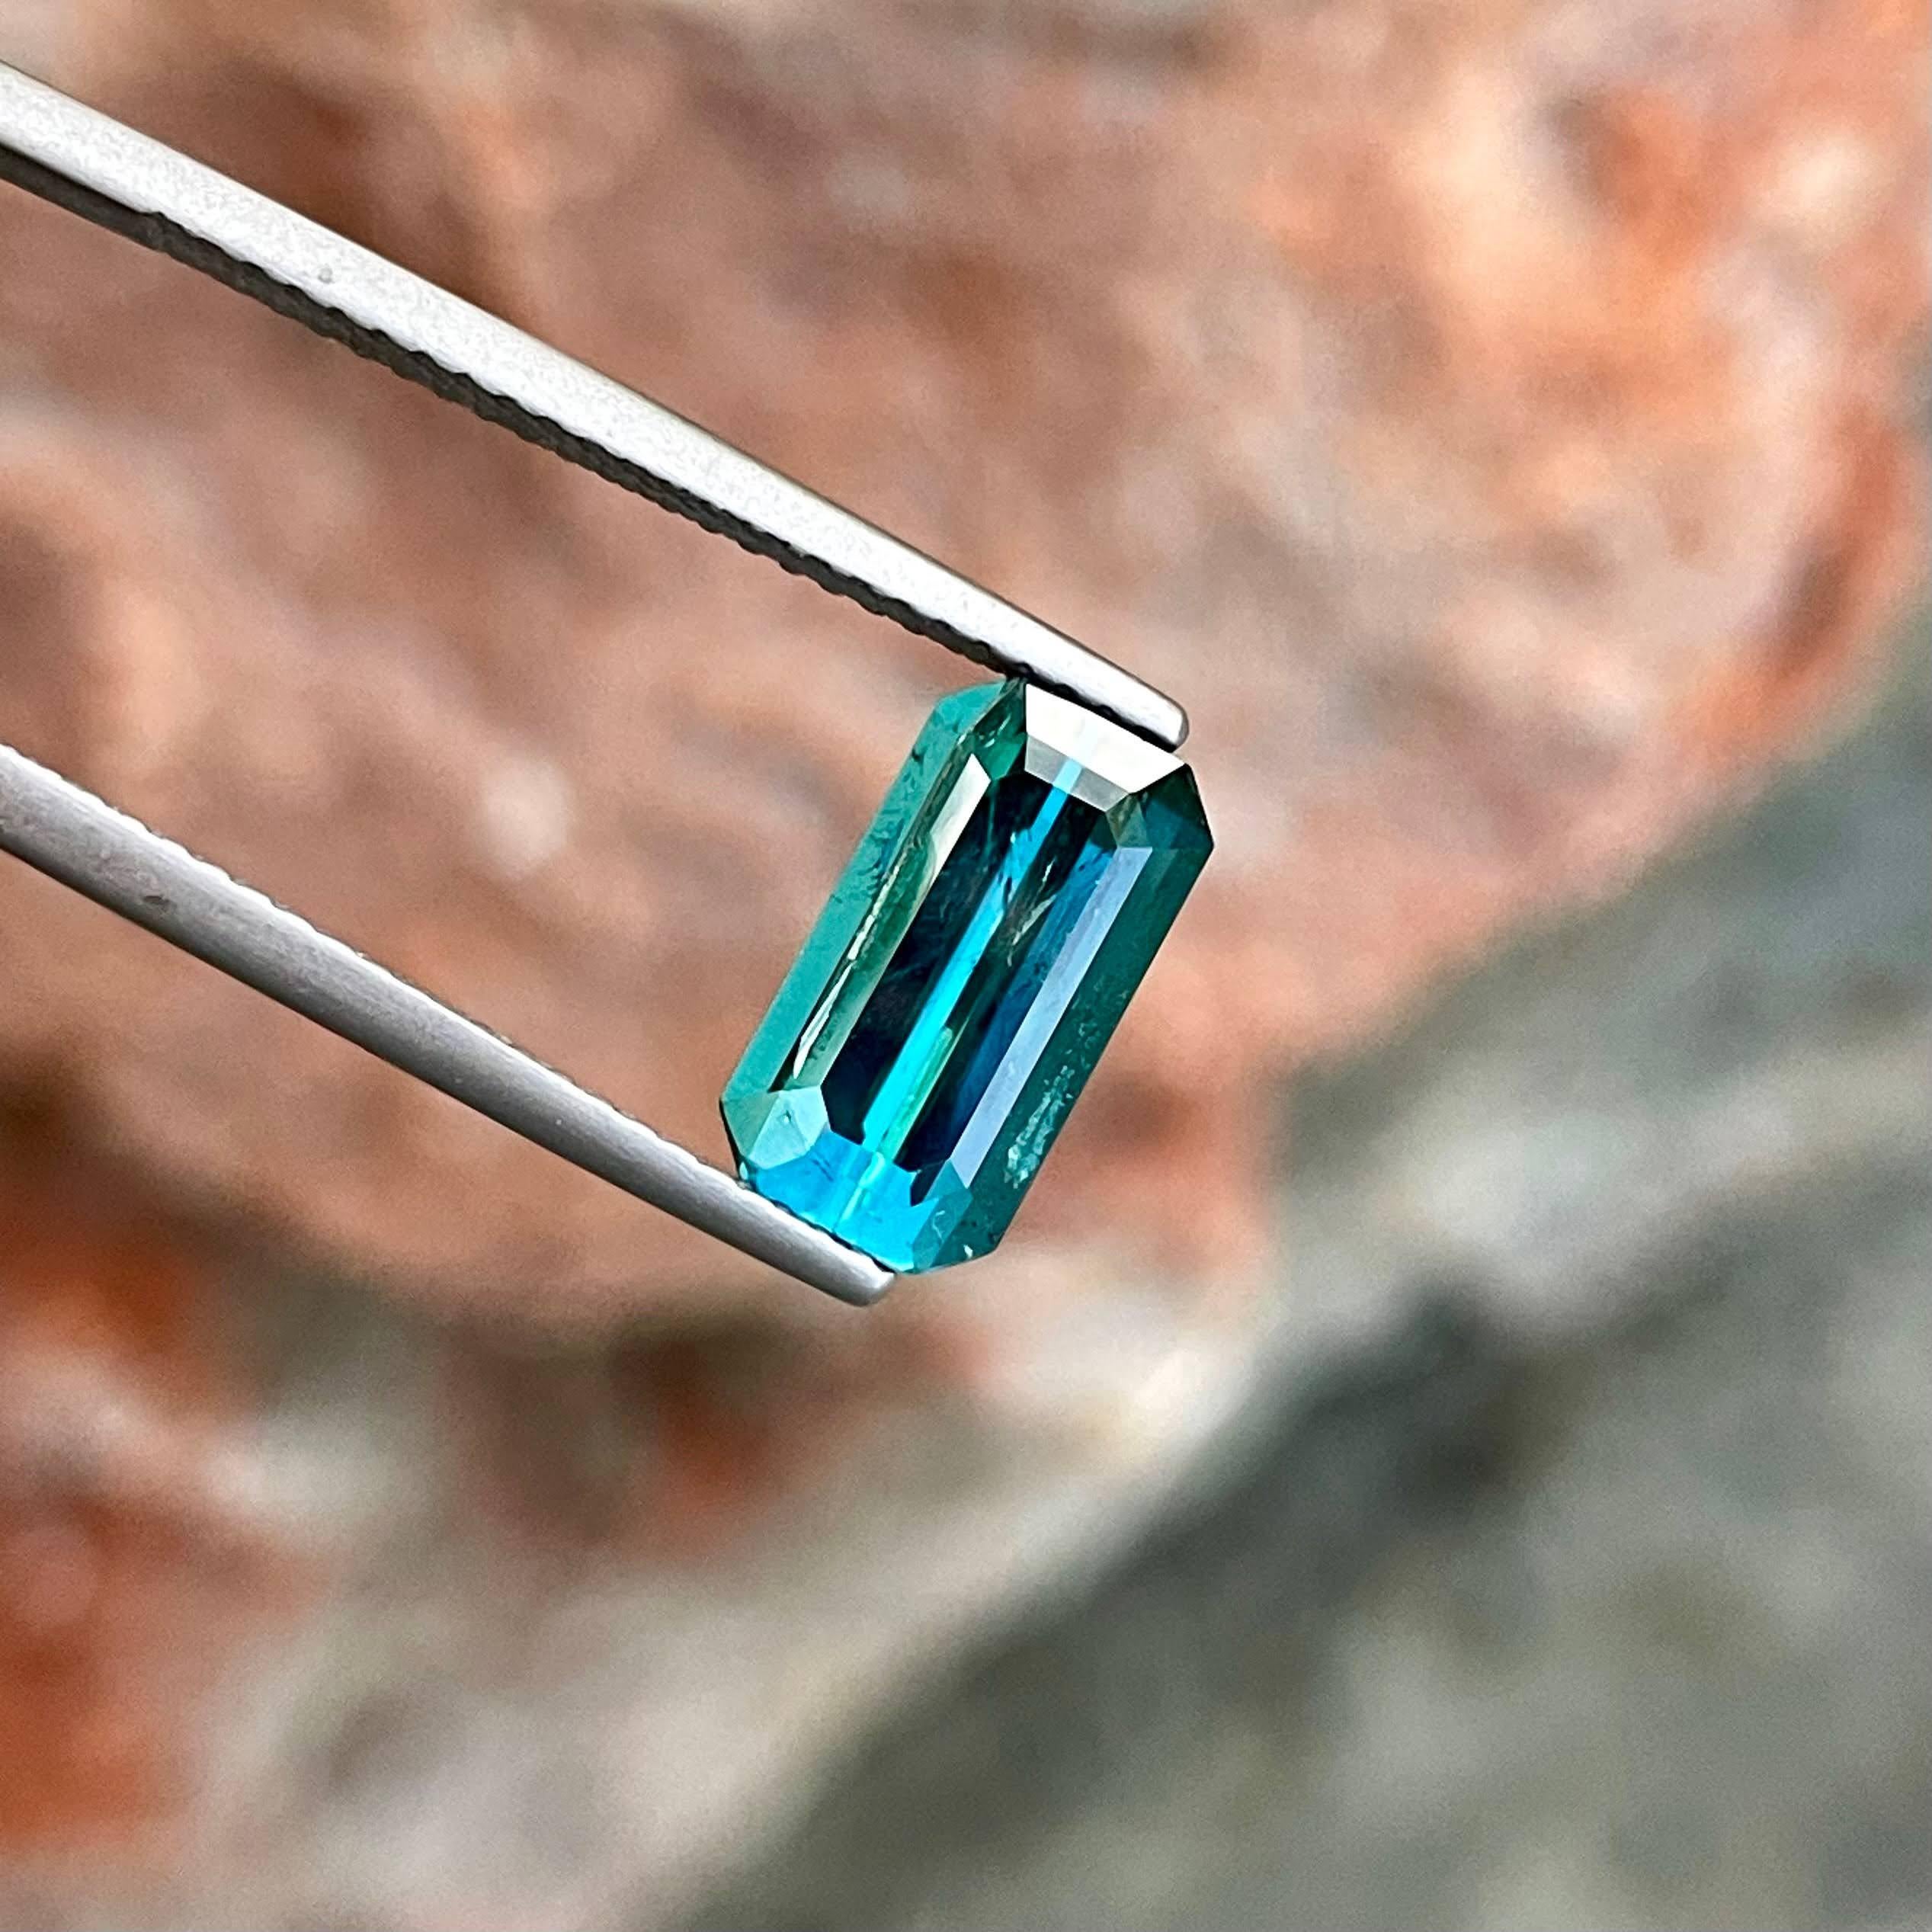 Women's or Men's 2.40 Carats Deep Indicolite Tourmaline Stone Emerald Cut Natural Afghan Gemstone For Sale